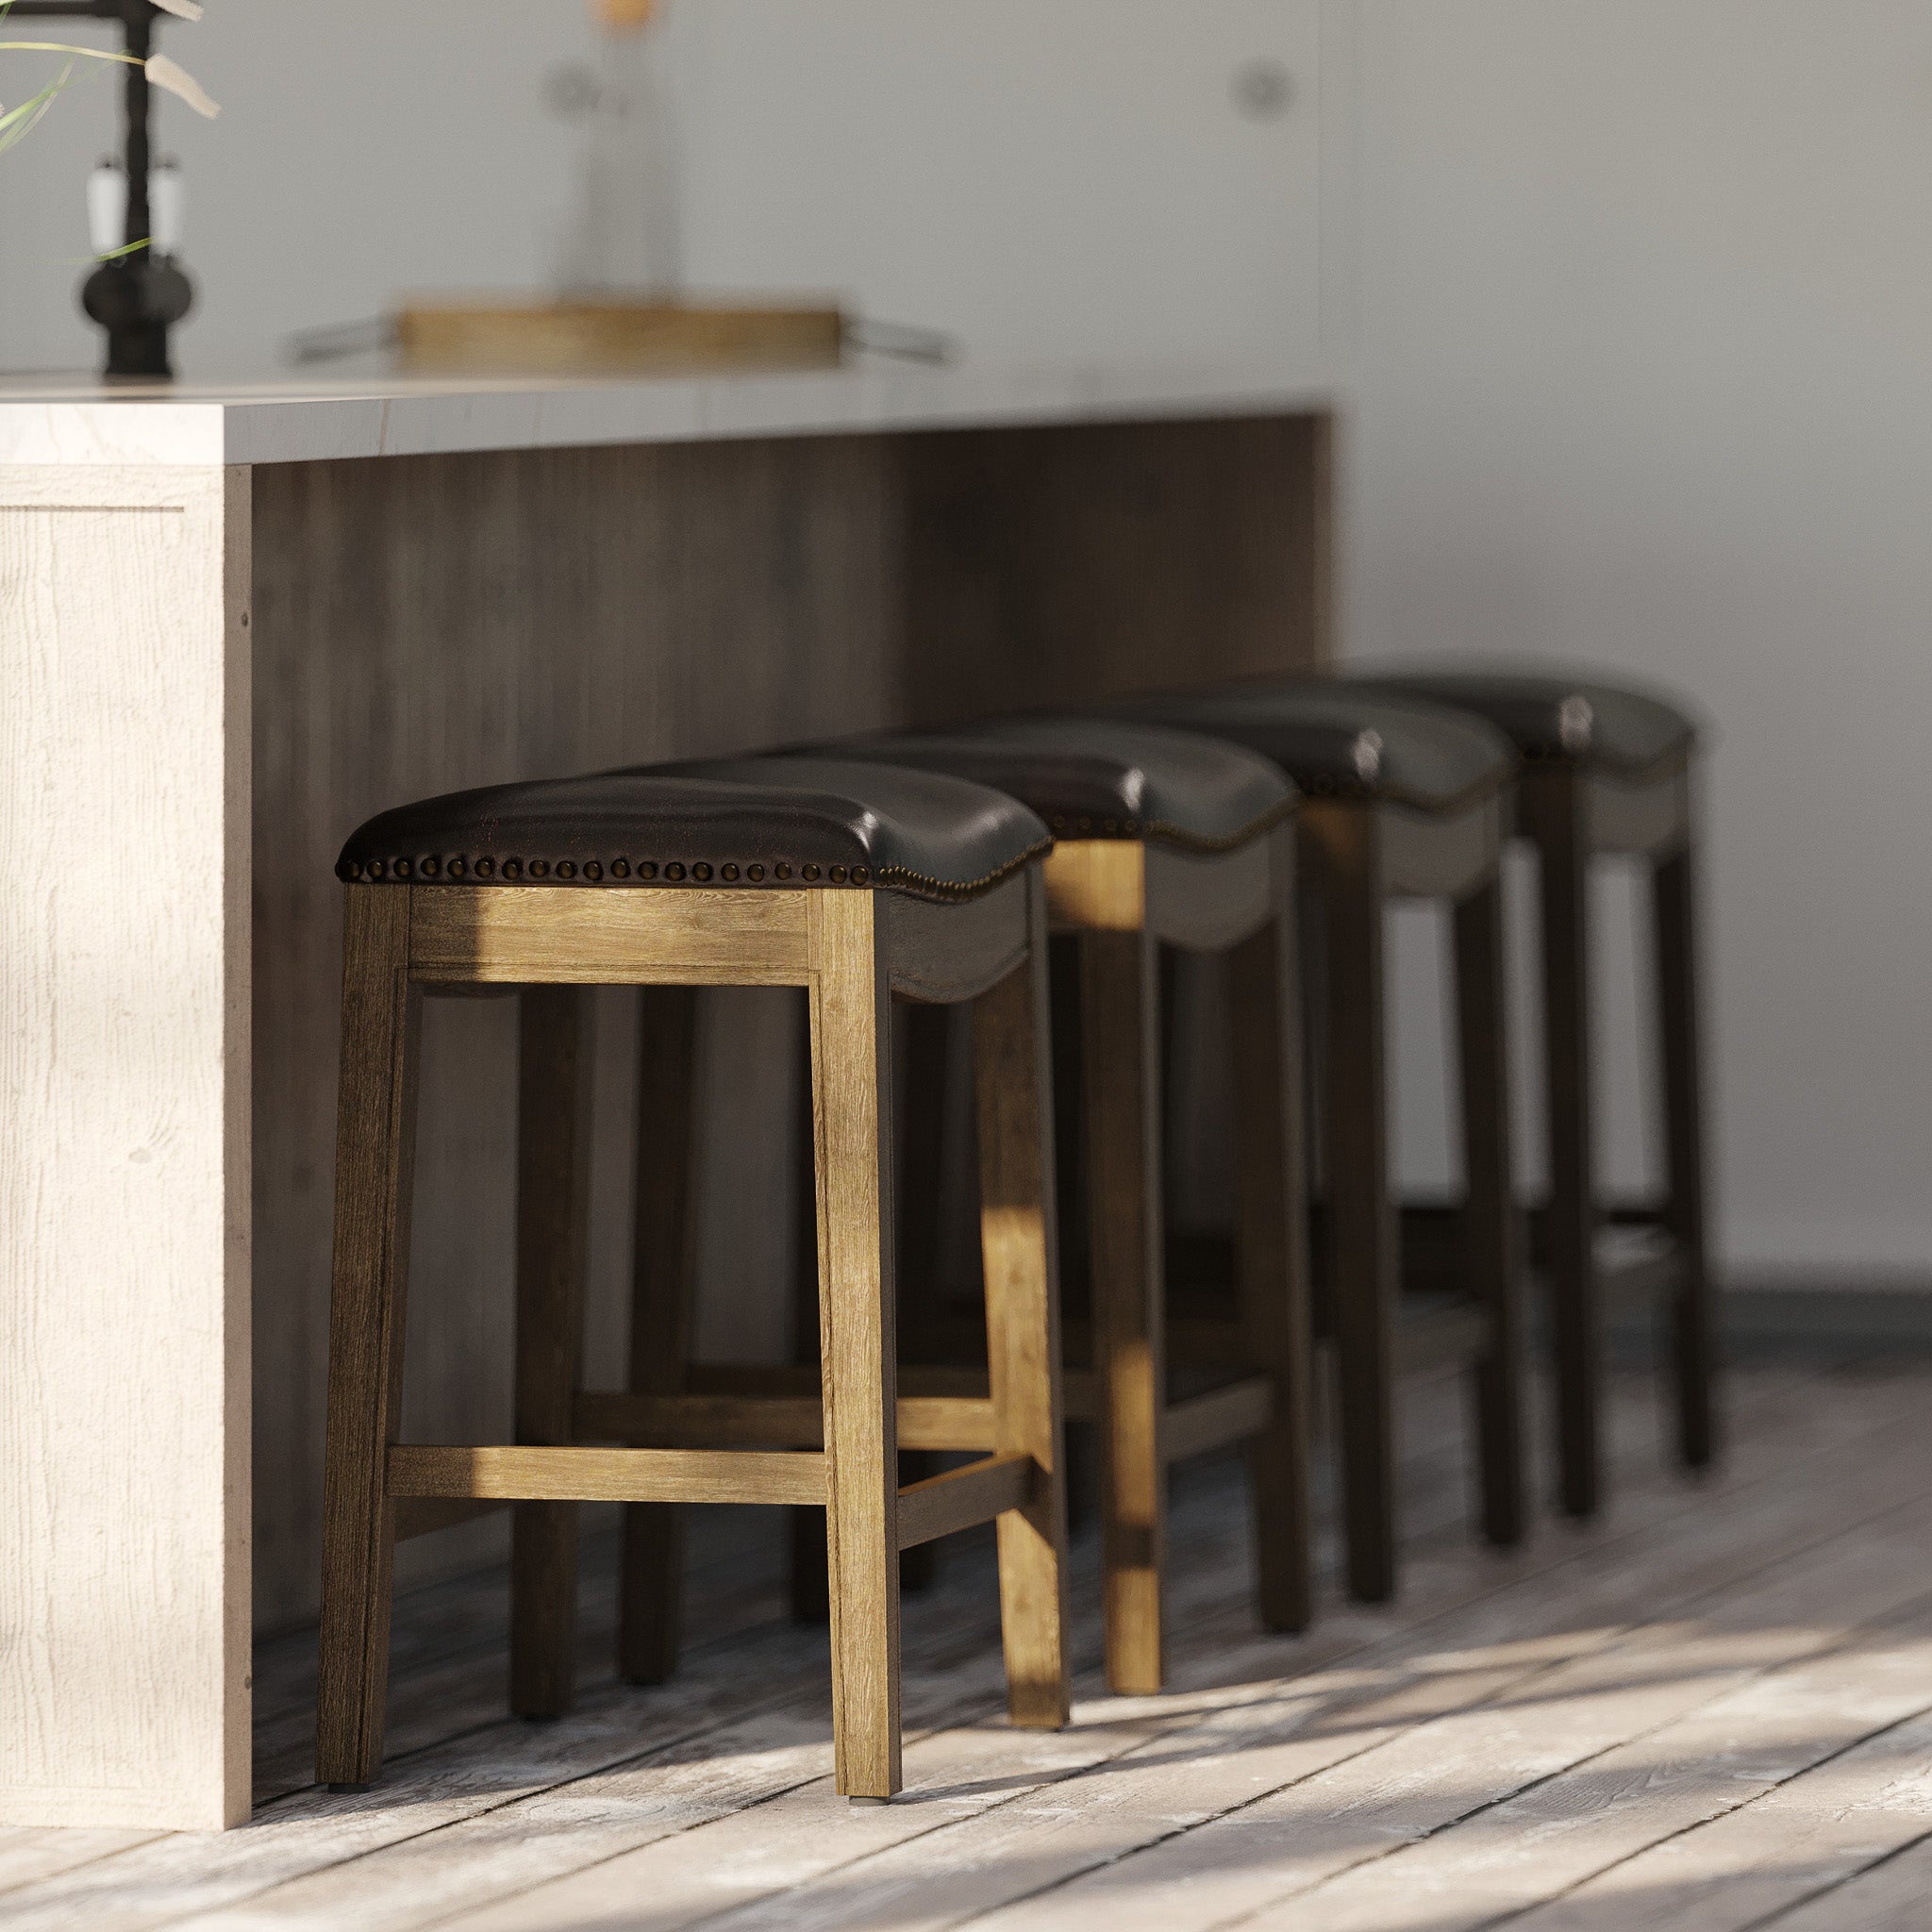 Adrien Saddle Counter Stool in Walnut Finish with Marksman Saddle Vegan Leather in Stools by Maven Lane